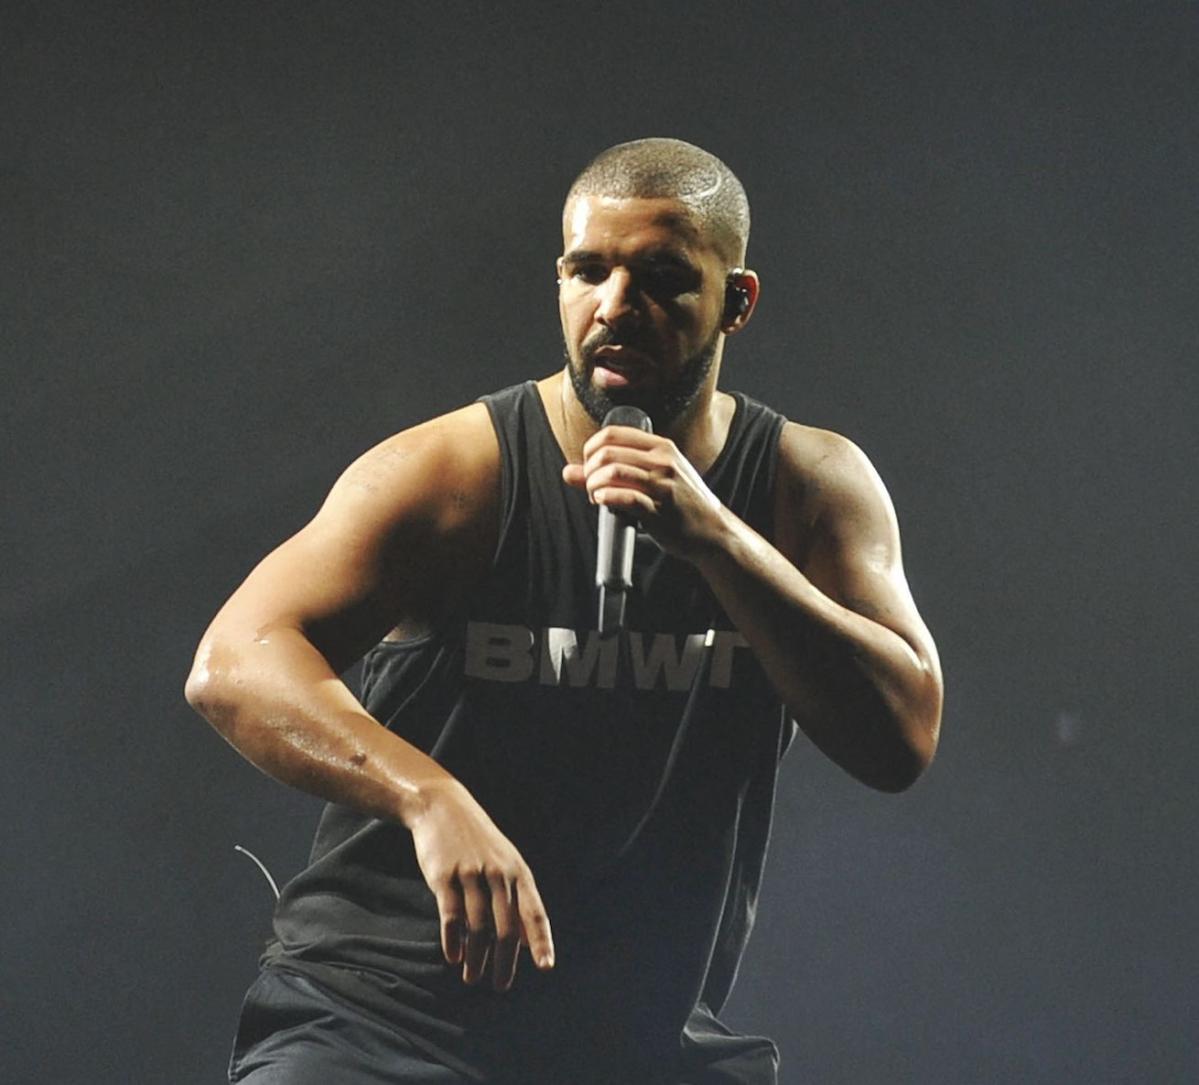 Drake Concertgoer Speaks Out After Being Identified as Bra Thrower